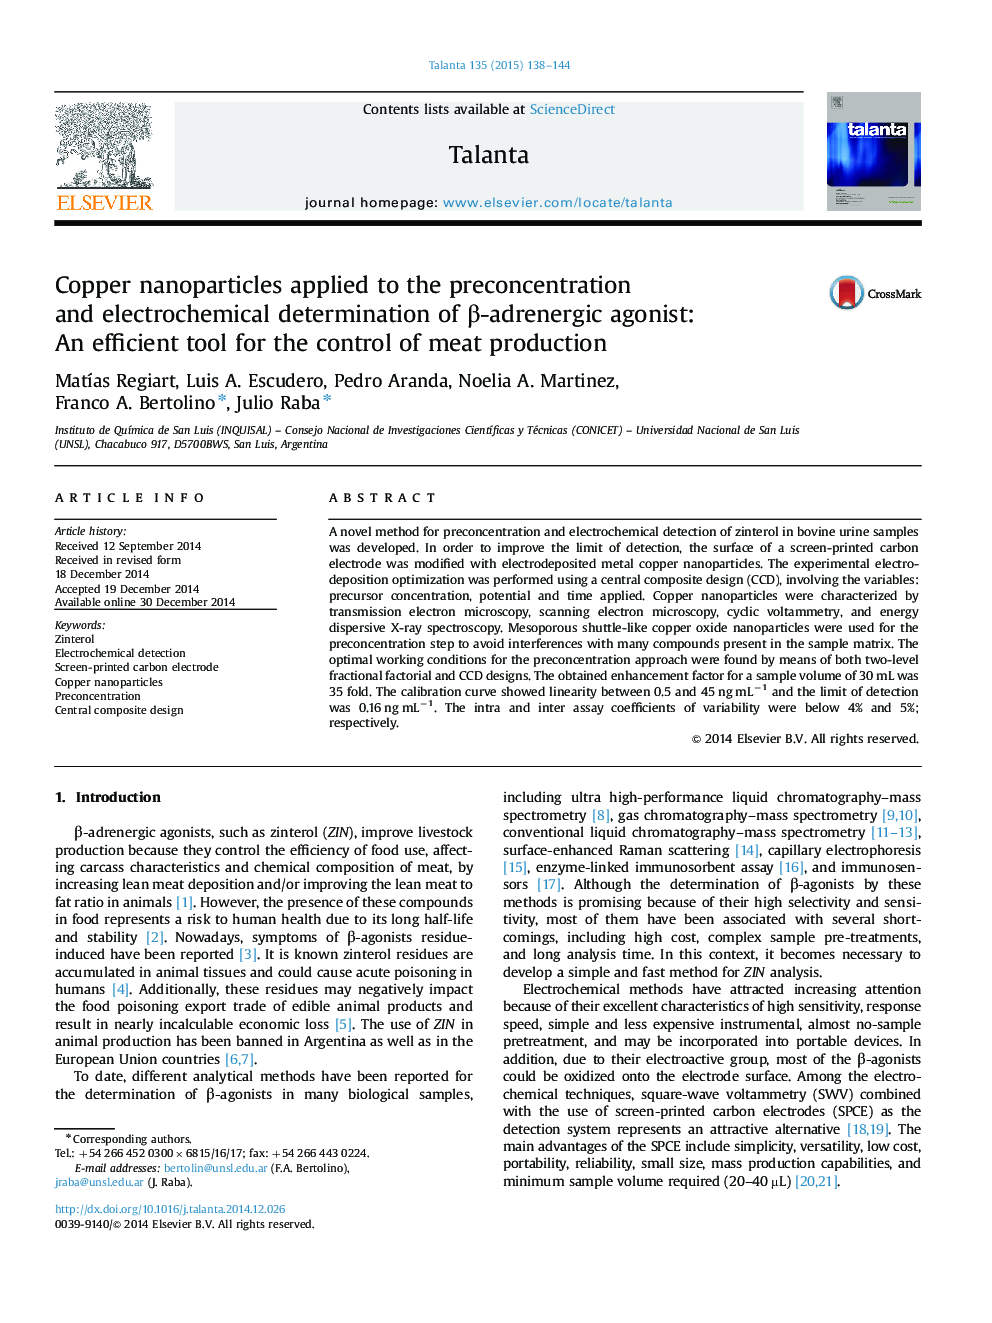 Copper nanoparticles applied to the preconcentration and electrochemical determination of β-adrenergic agonist: An efficient tool for the control of meat production